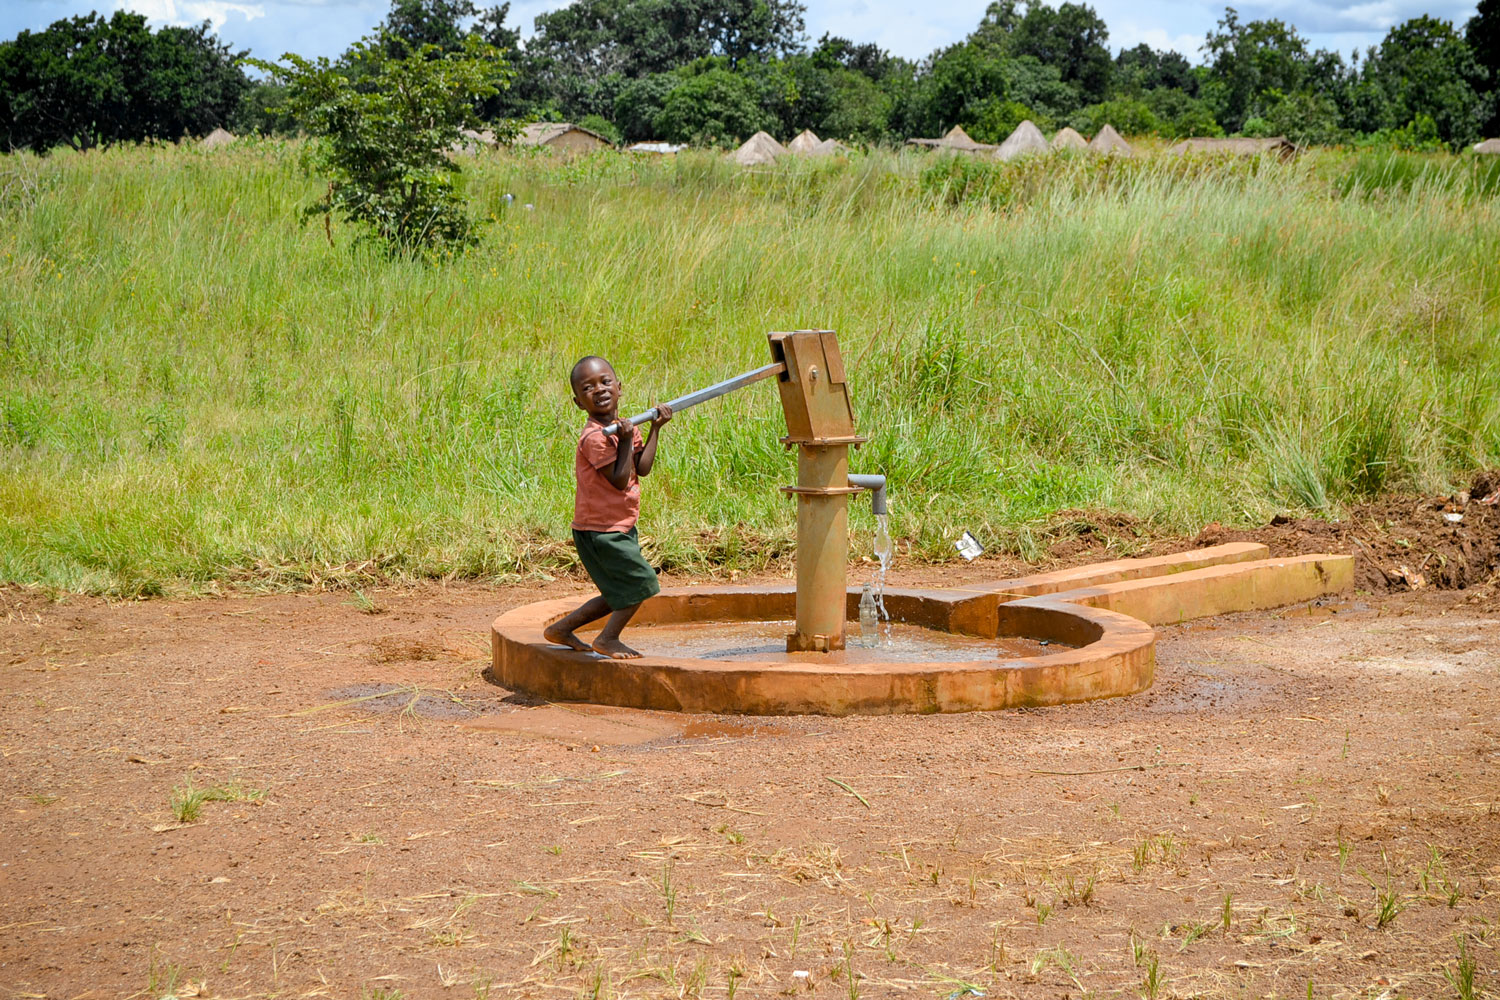  The Care Point has a bore hole which is used for collecting water to cook with and to drink. 